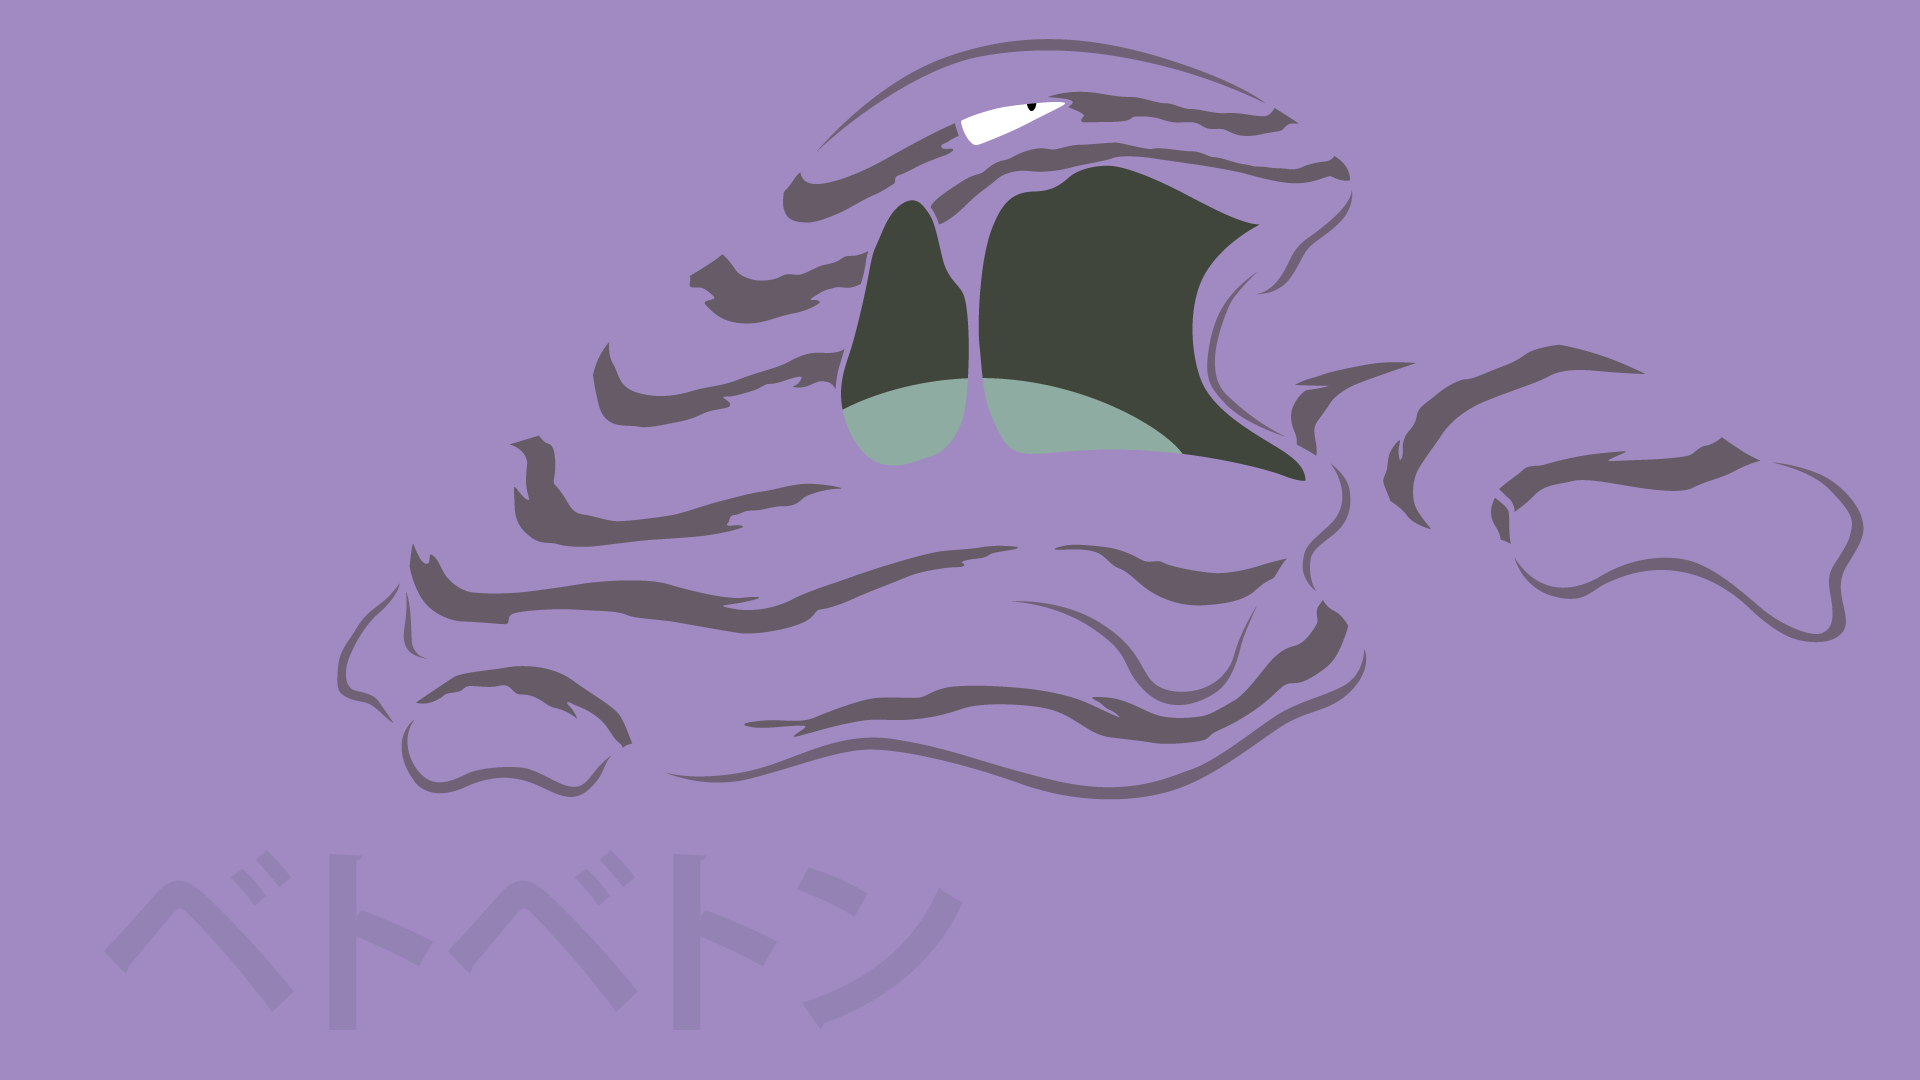 Muk By Dannymybrother